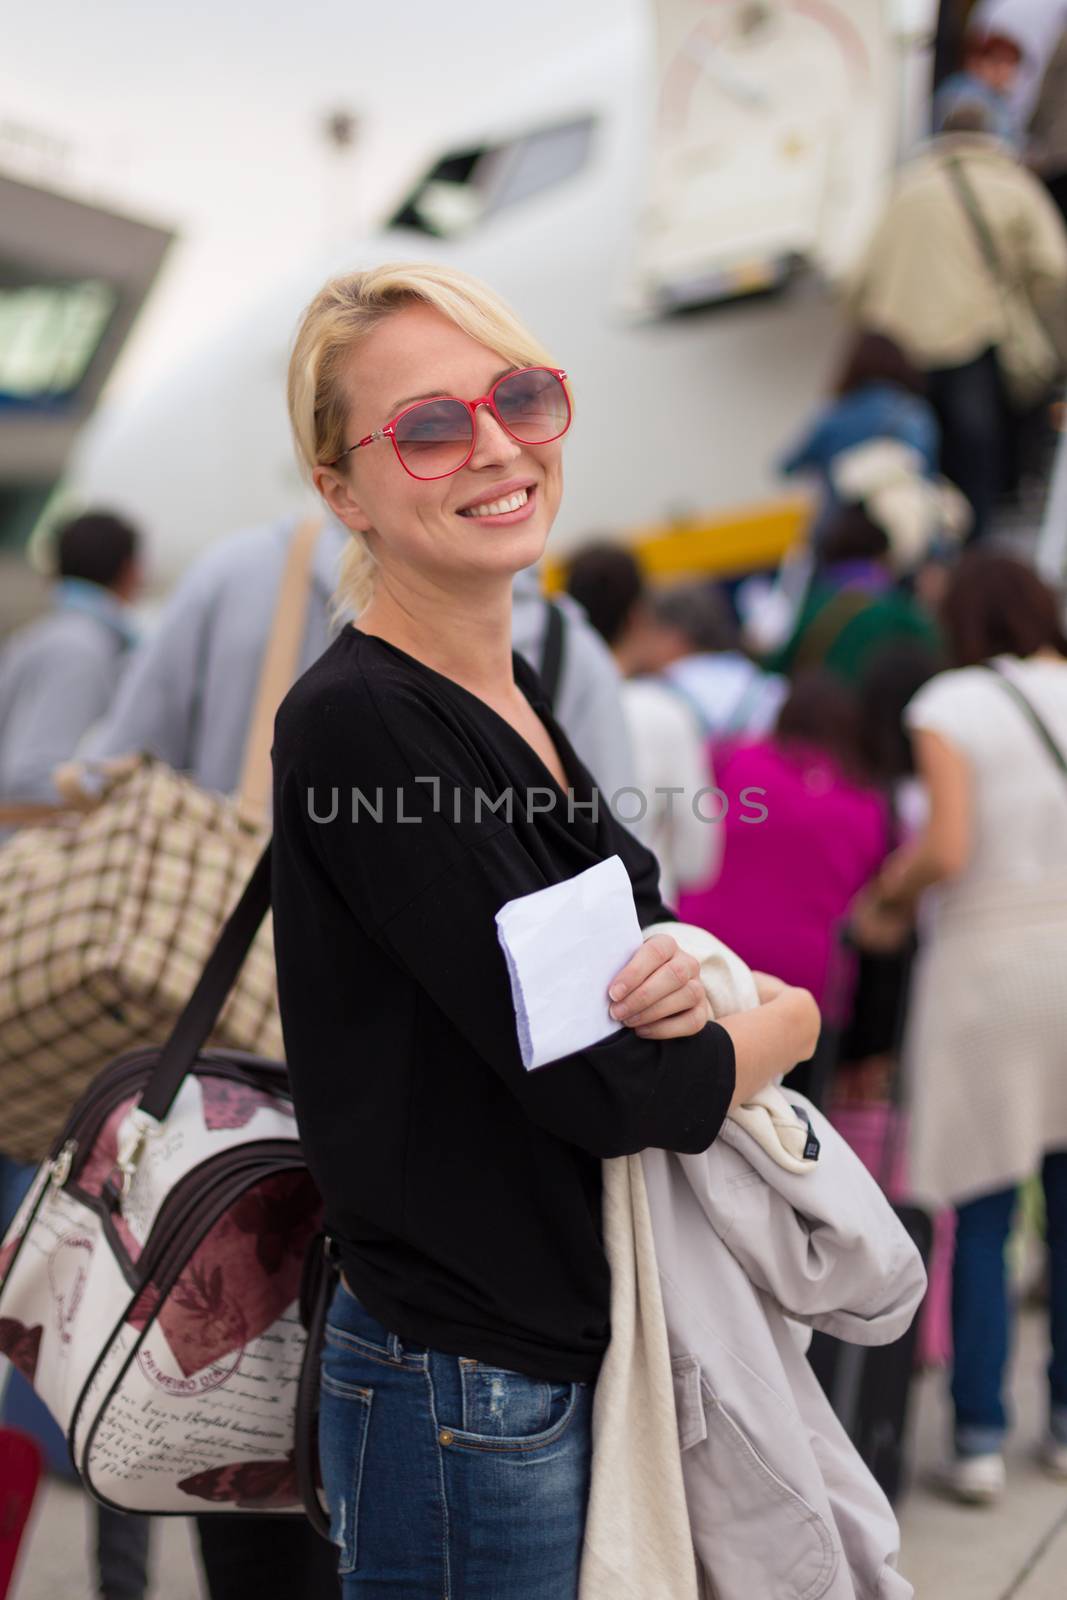 Joyful woman holding carry on luggage queuing to board the commercial airplane.